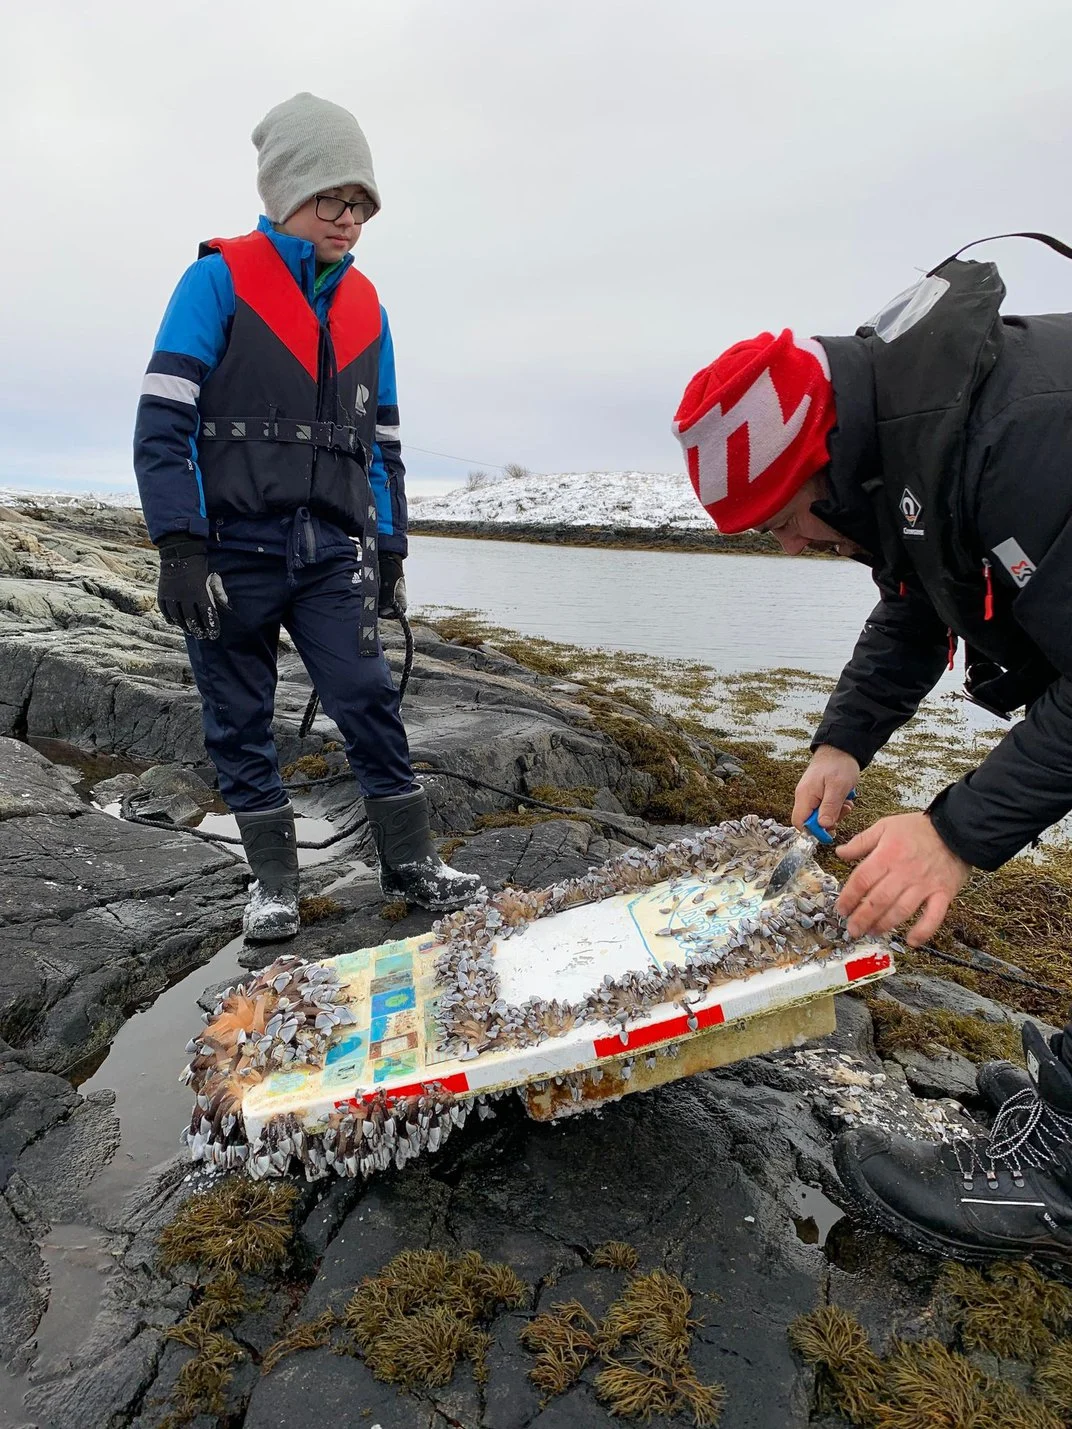 Boat made by middle-school children in New Hampshire washes ashore in Norway after 462 days